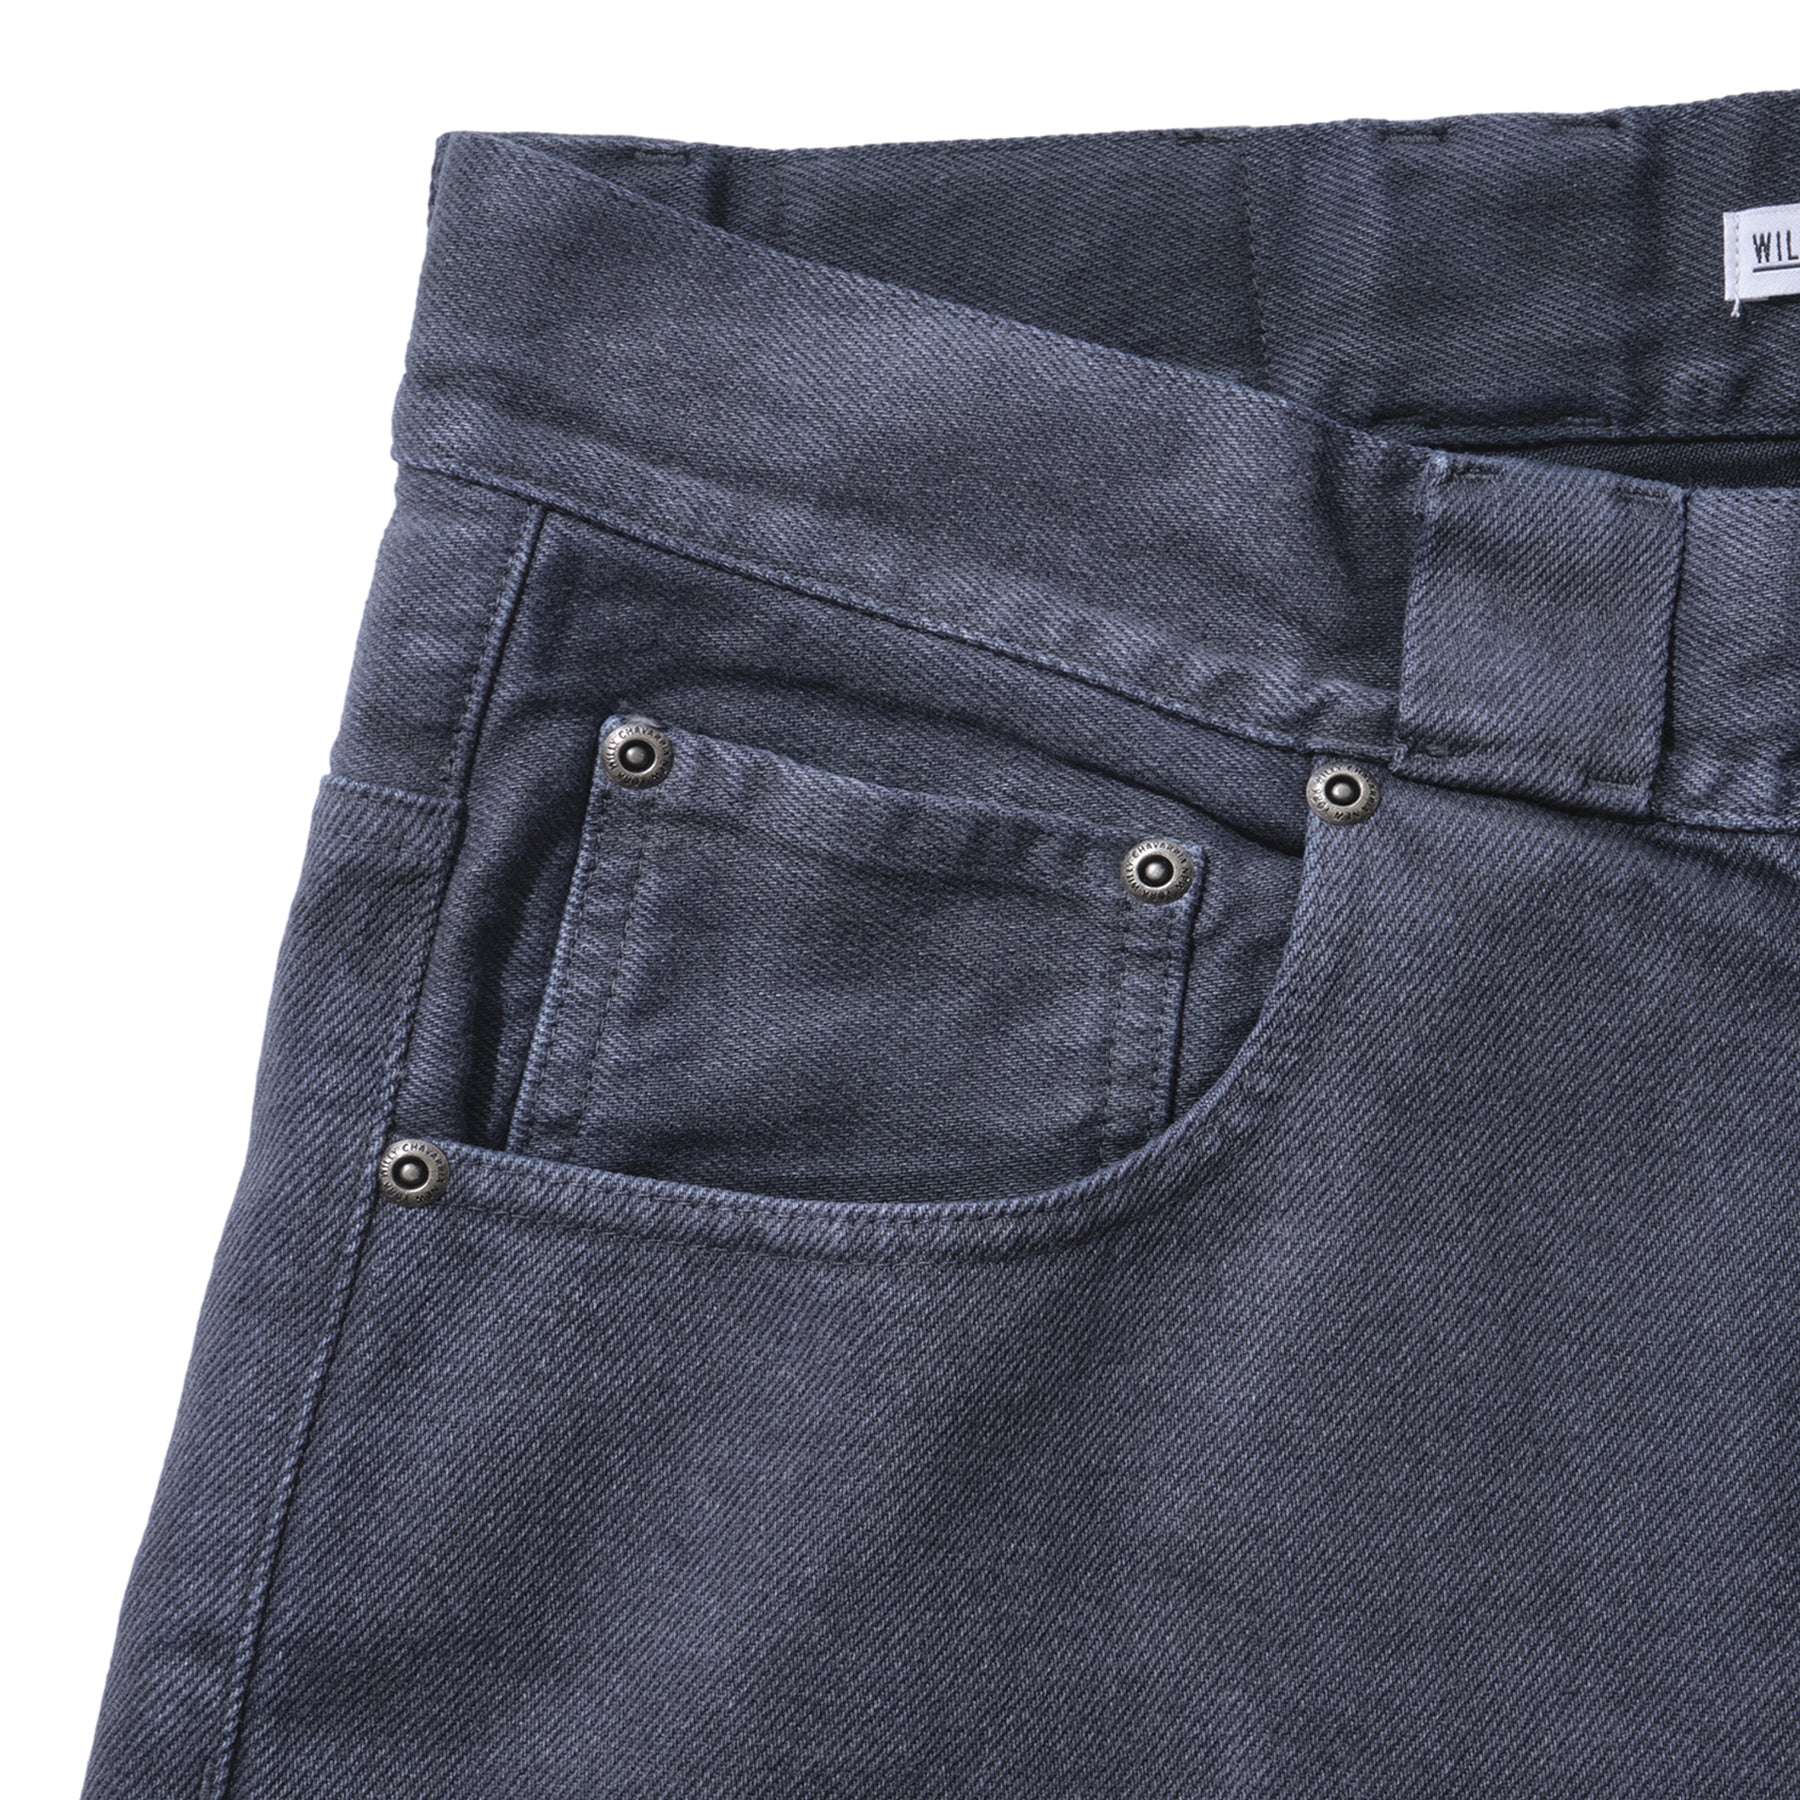 WILLY CHAVARRIA / STRAIGHT DENIM PANTS CHEMICAL WASH BLACK